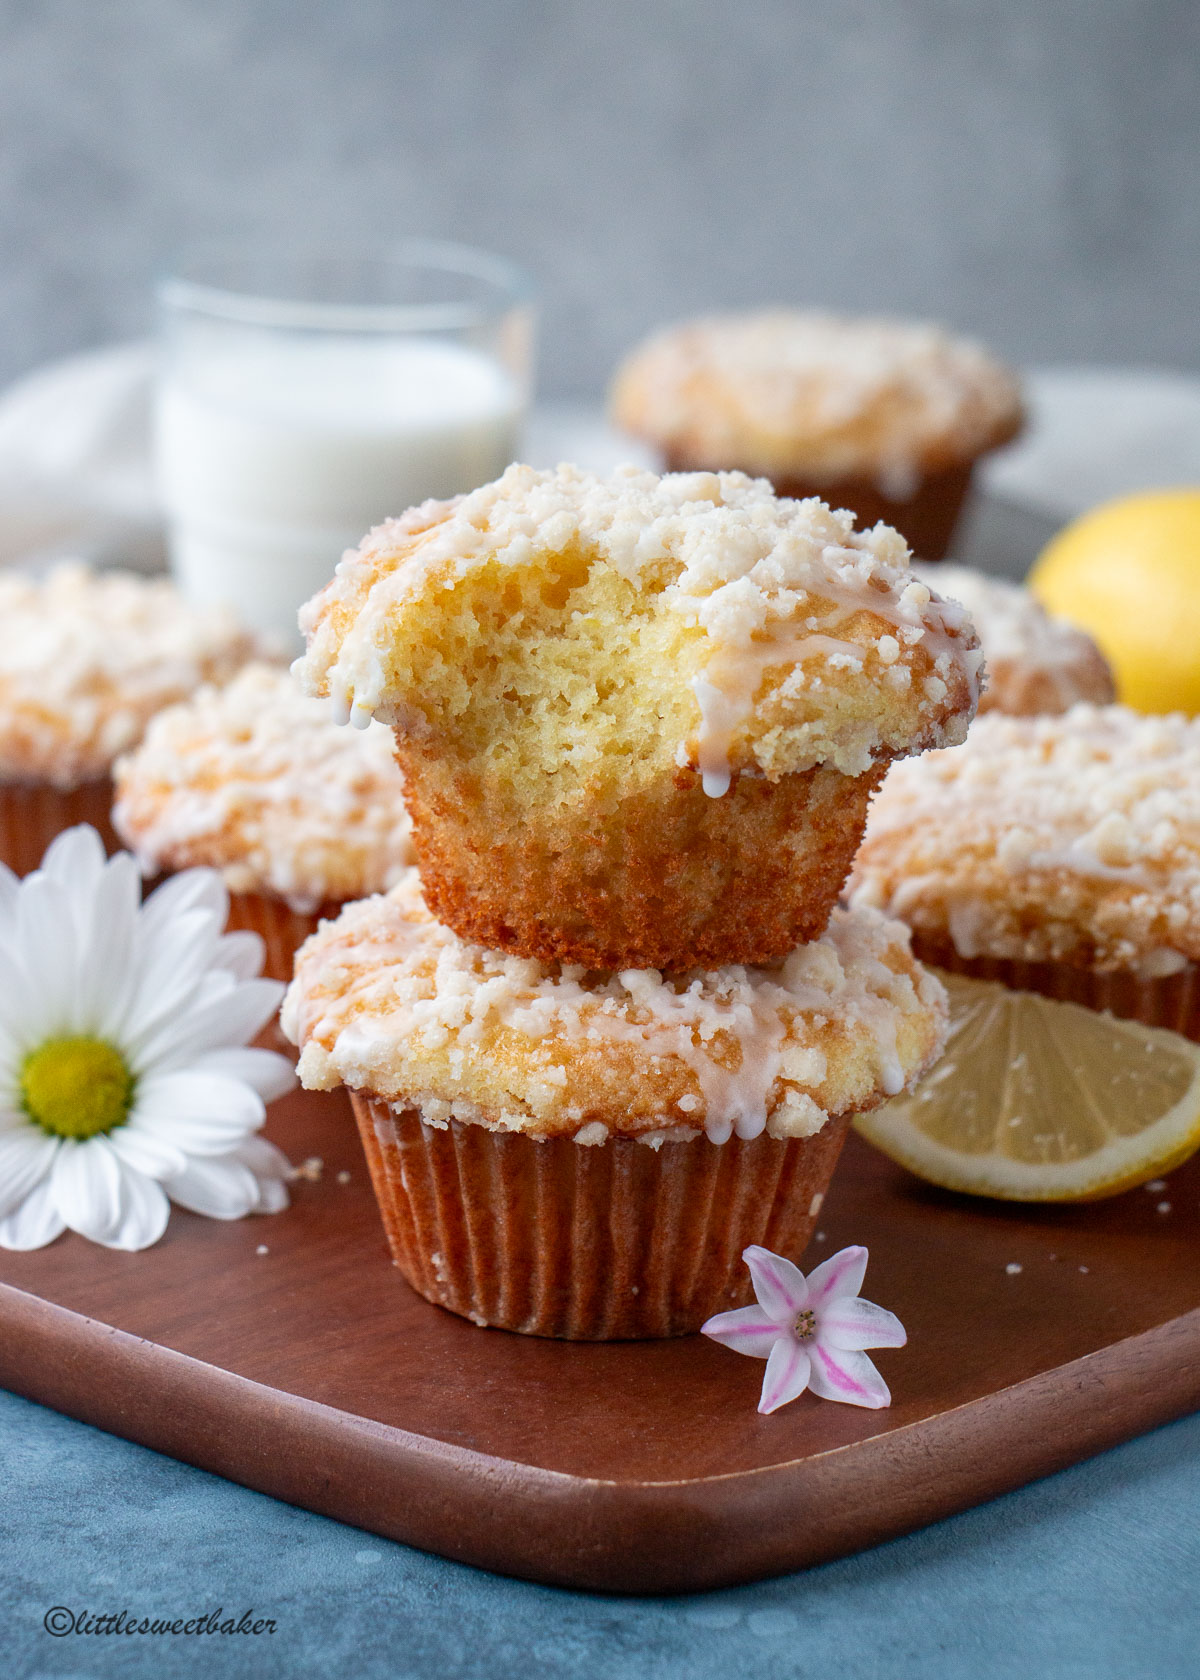 Two lemon muffins stack on top of one another with a bite taken out of the top one.